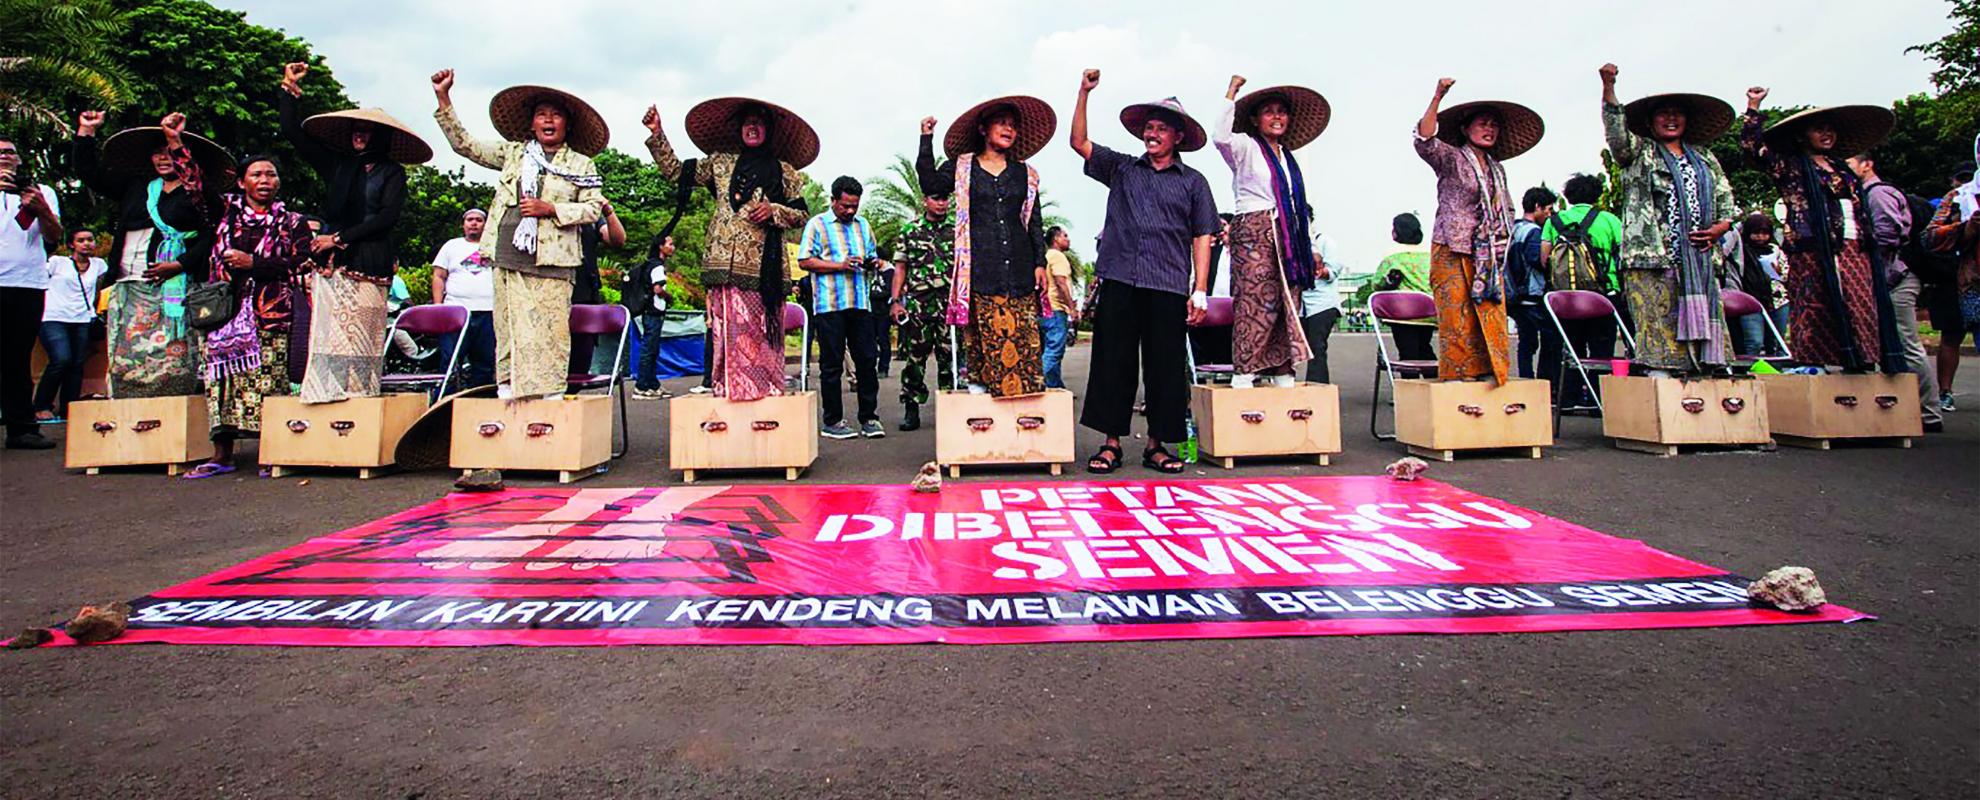 Protest aan rimbang palace in indonesië